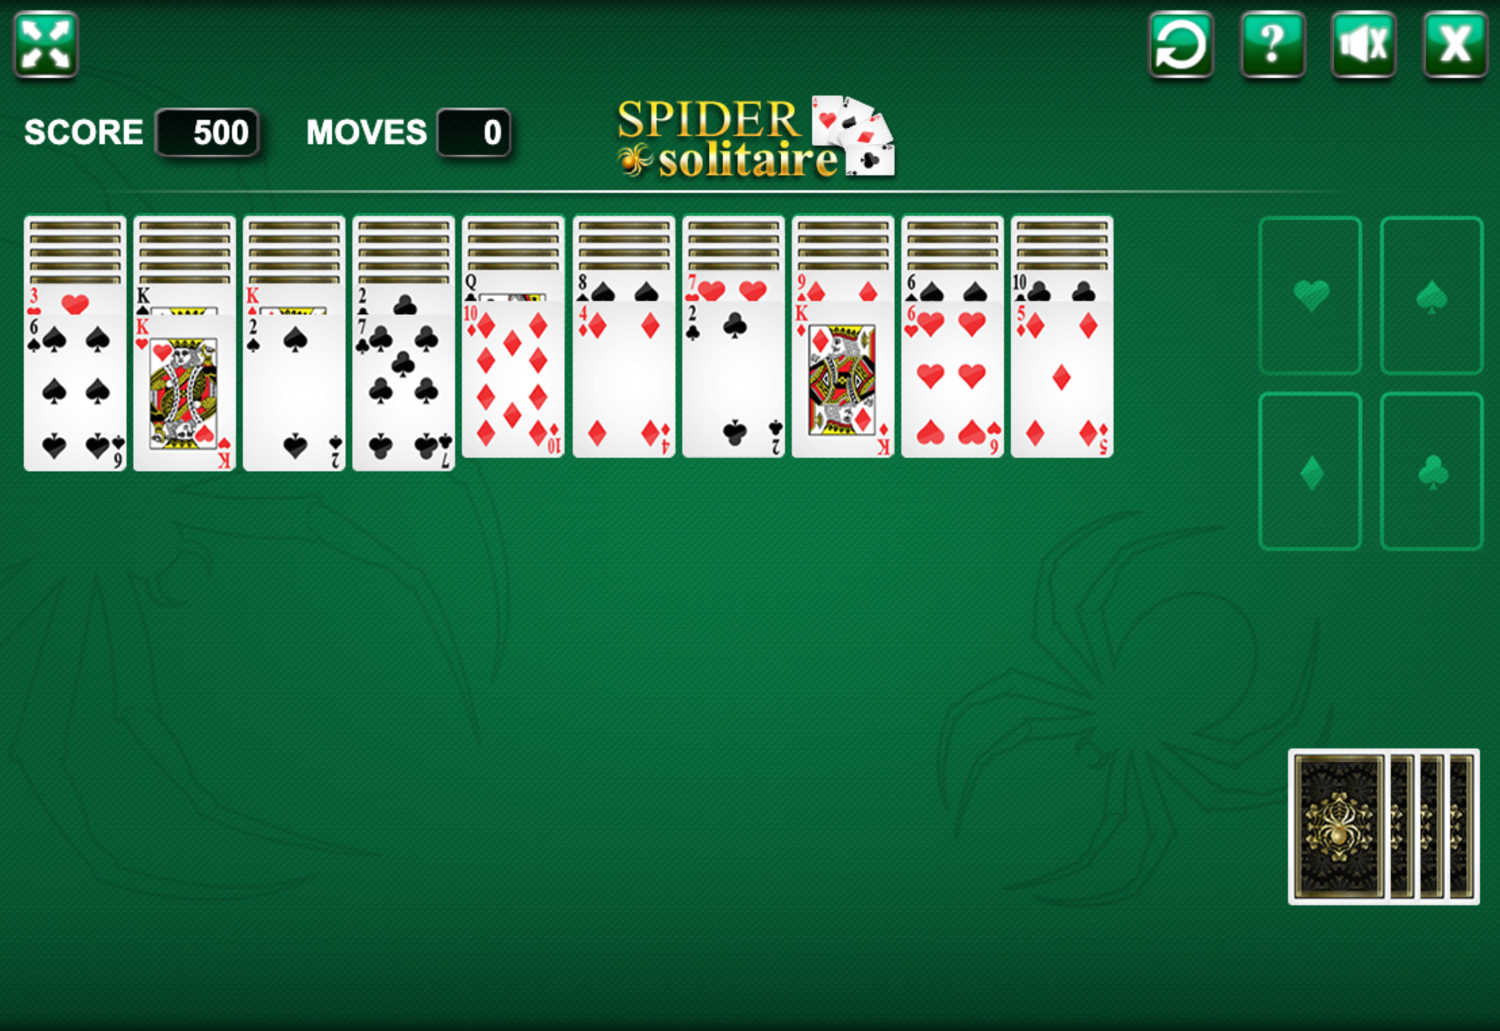 Spider Solitaire Four Suits Game Screenshot.